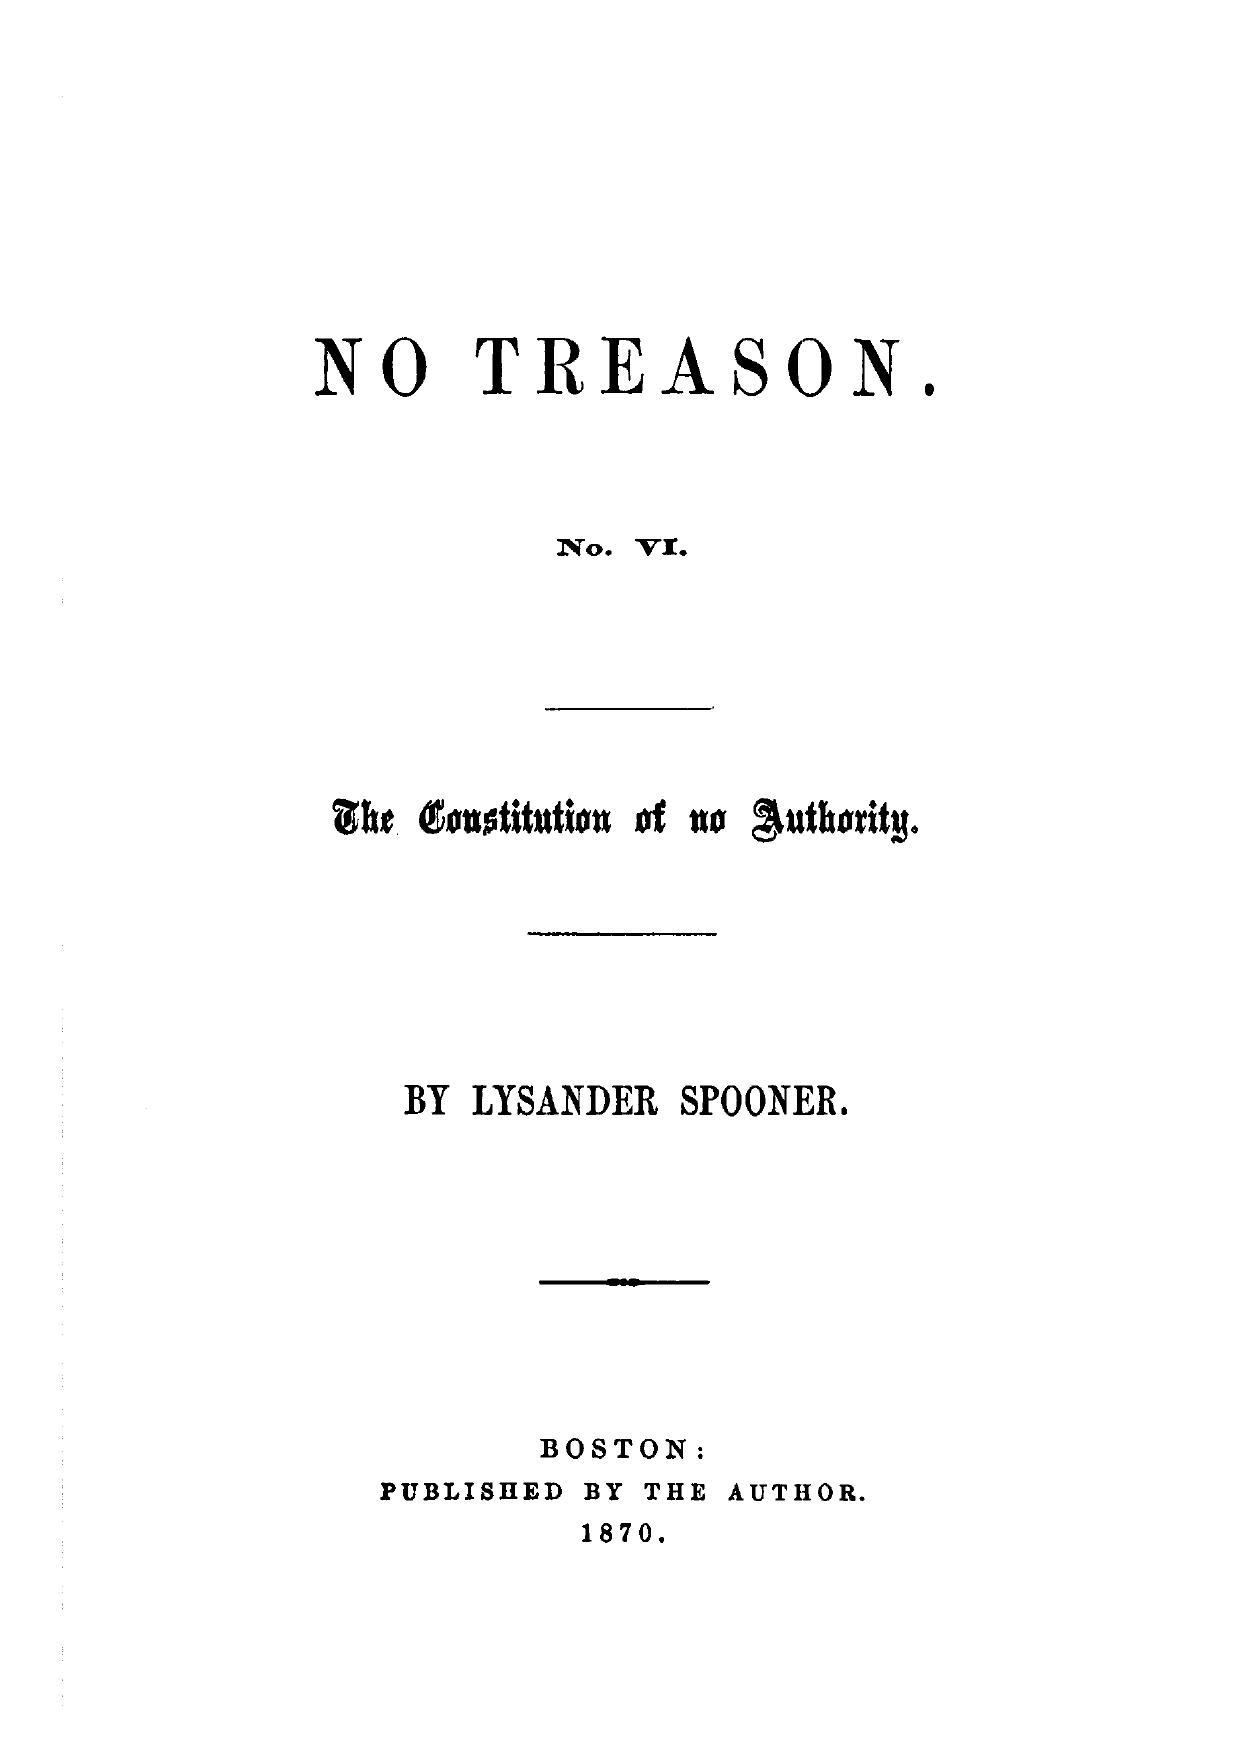 No Treason VI - The Constitution of No Authority (1870) by Lysander Spooner